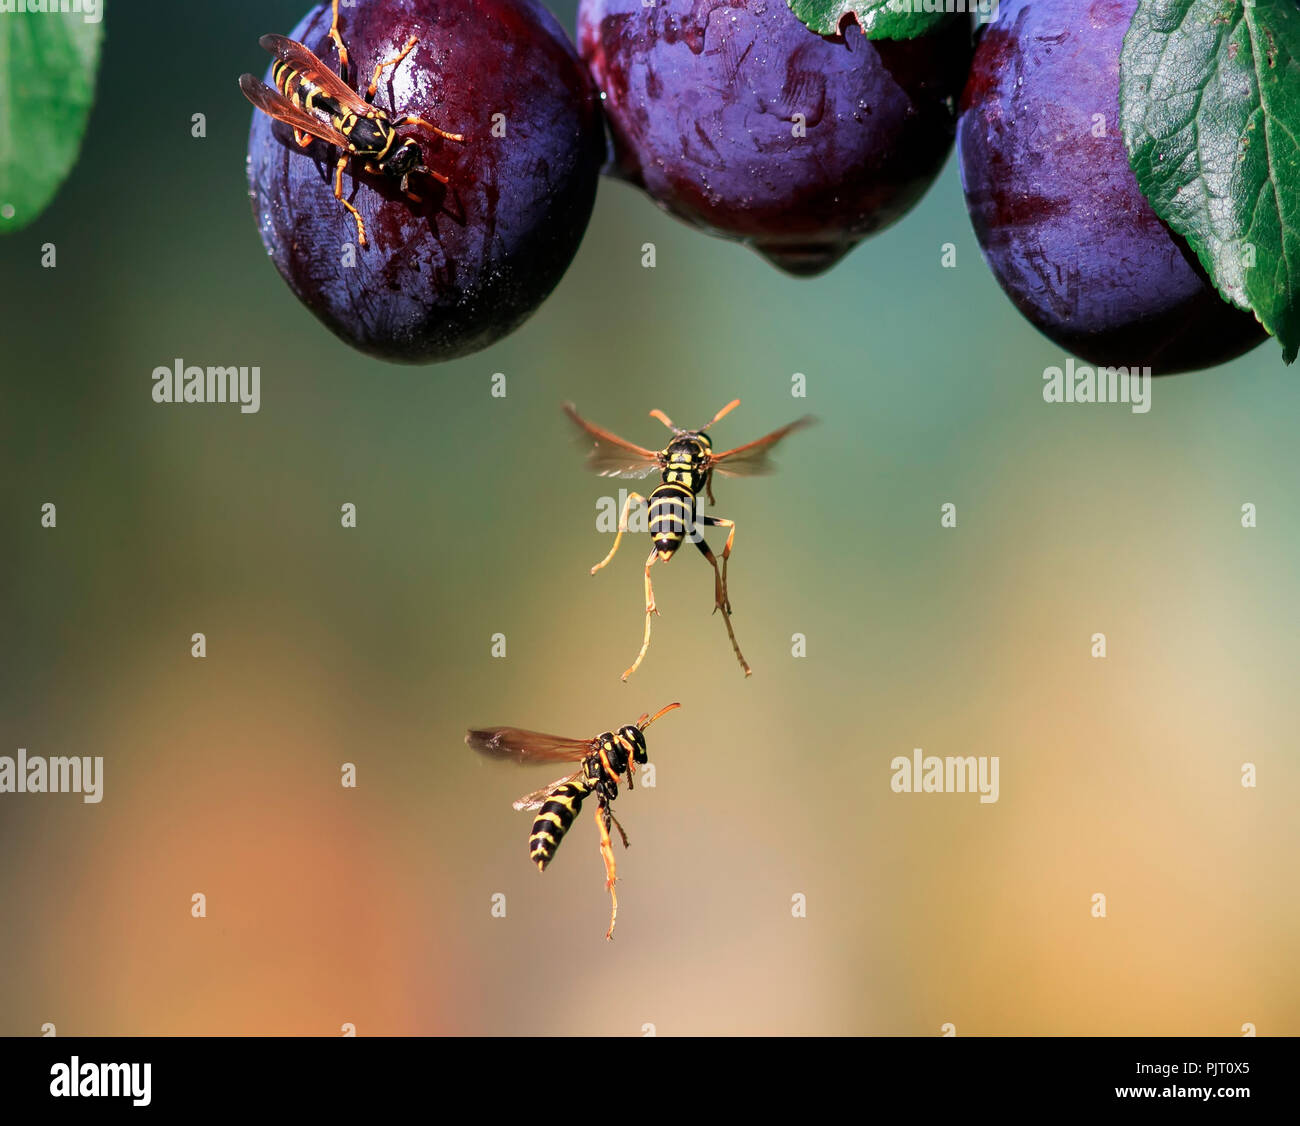 striped dangerous insects wasps flew in a garden on a branch with a crop of ripe purple fruits plums ripe them on a summer day Stock Photo